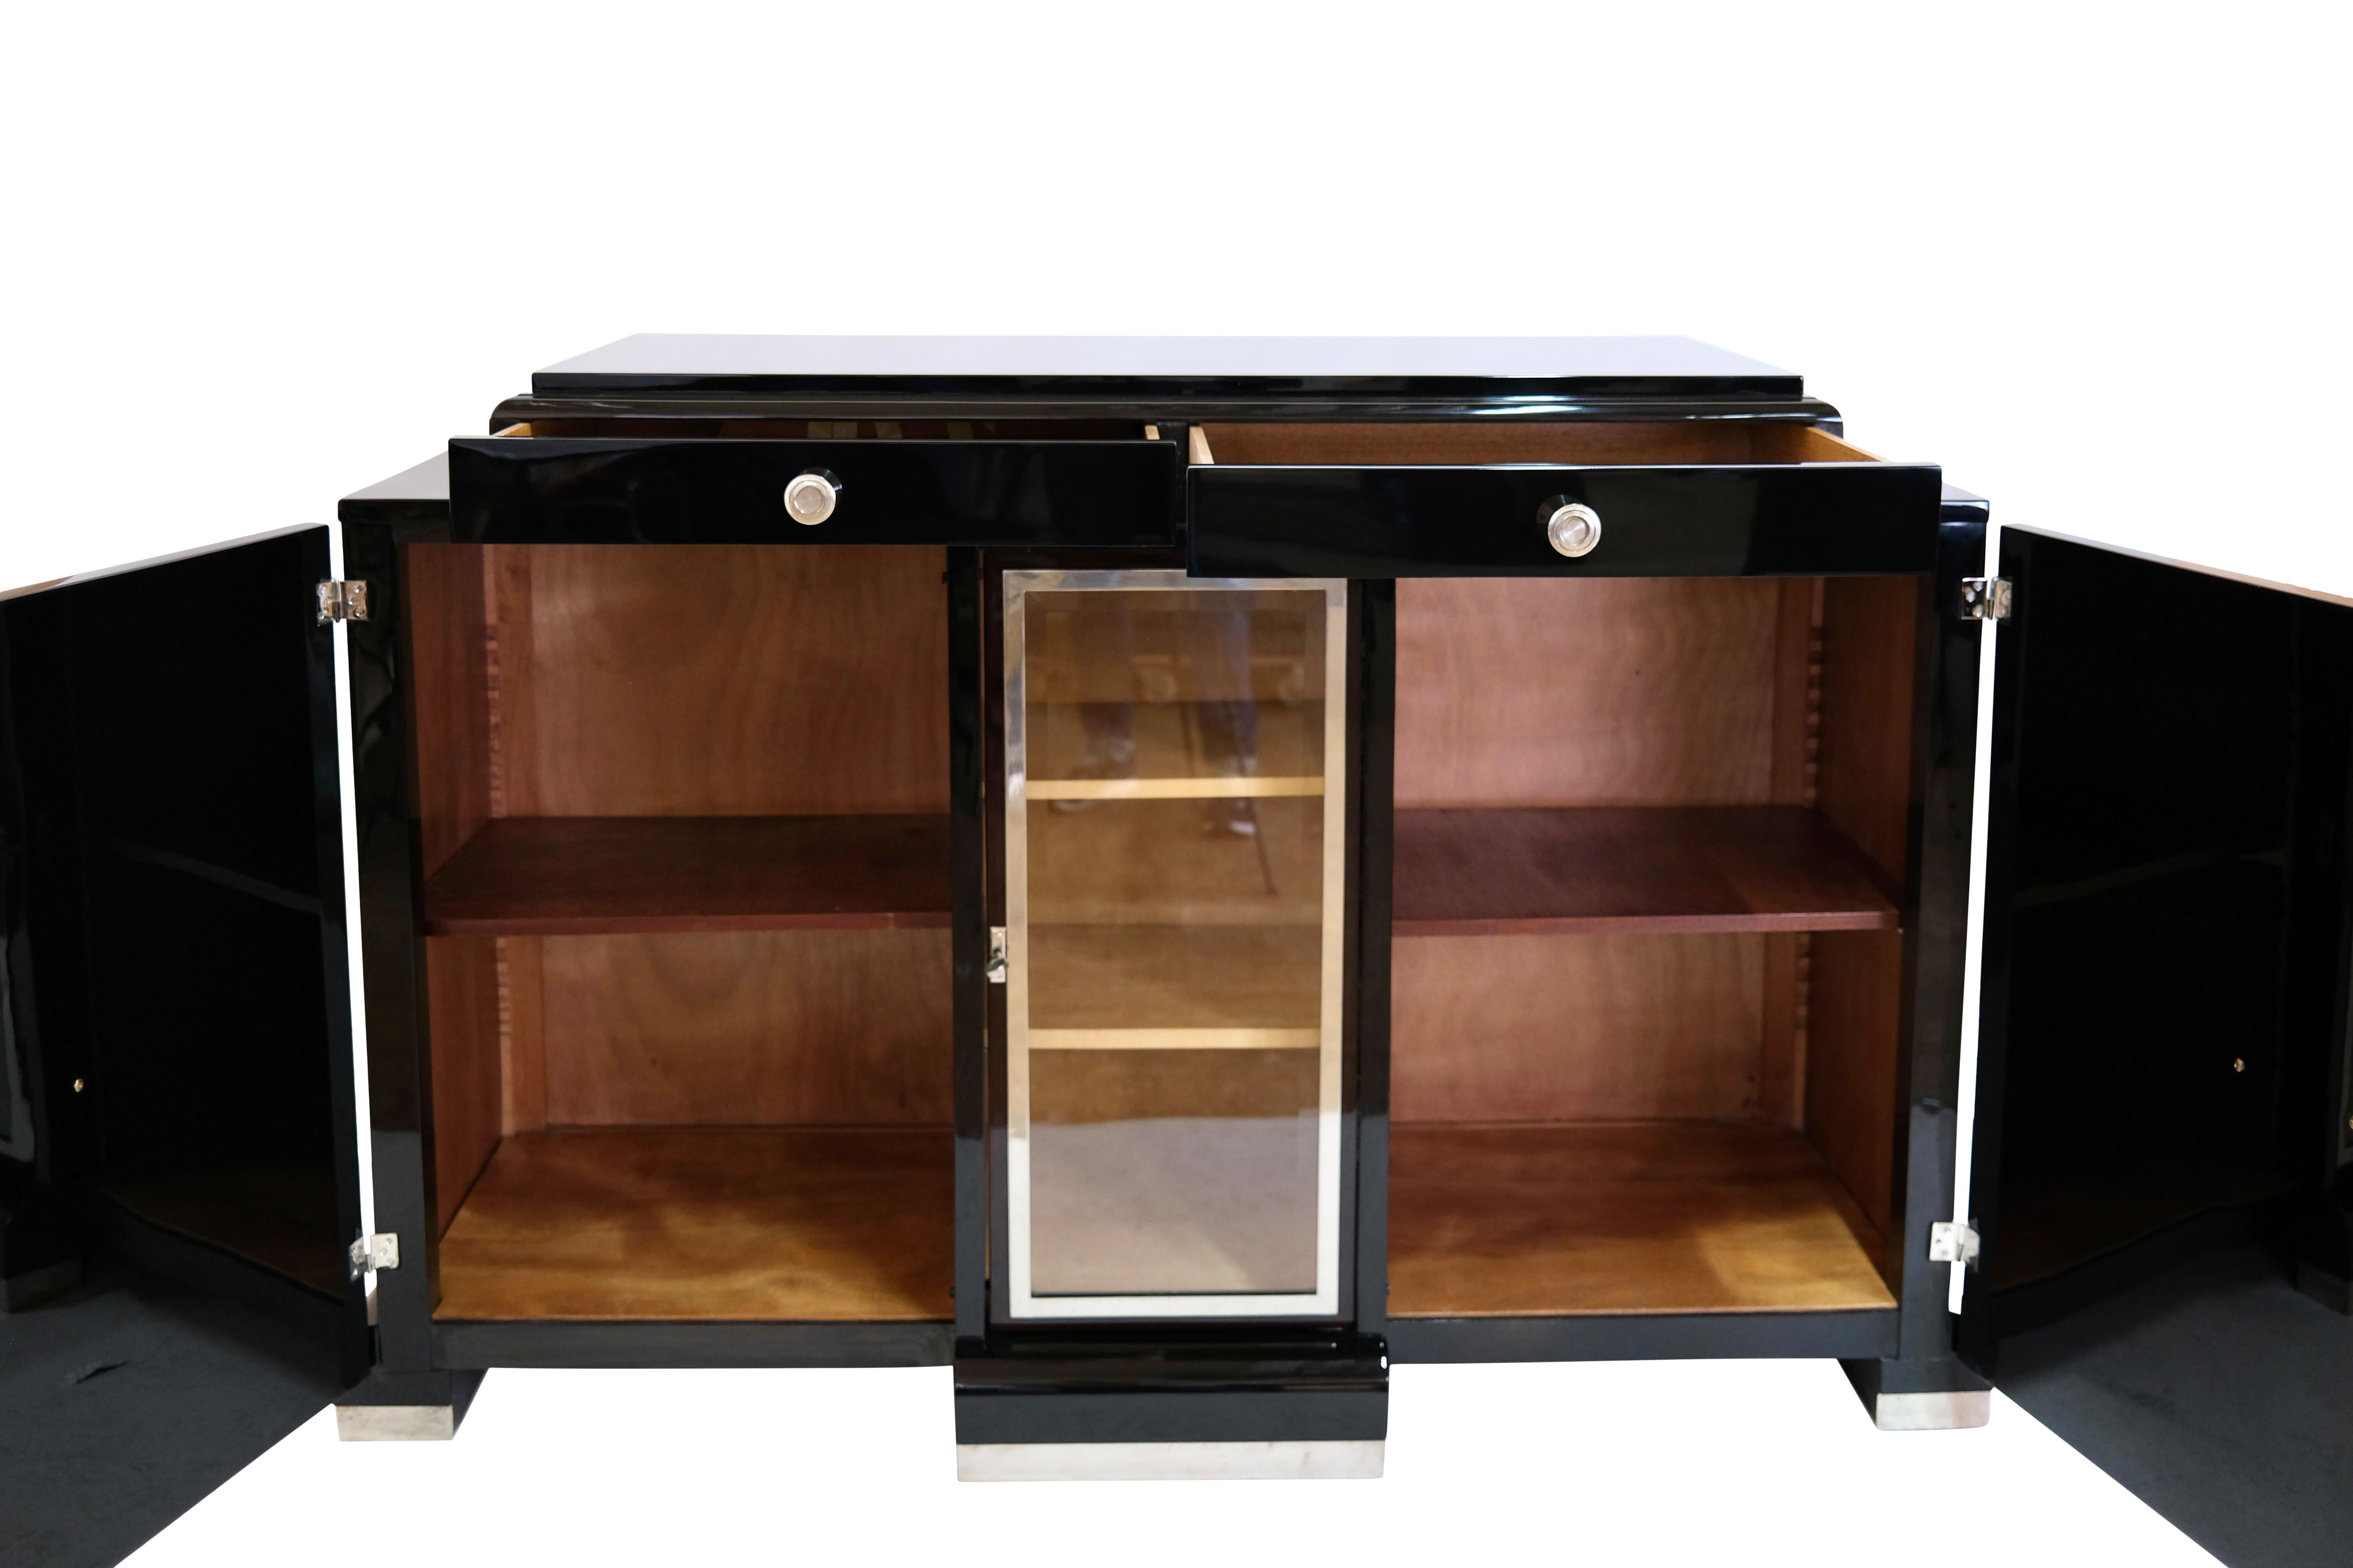 Two-door sideboard with small display cabinet and drawers
Fronts: probably ash stained, high gloss lacquered
Body: piano lacquer in black high gloss
Original fittings and metal applications

Cabinet compartment in maple (can be mirrored on